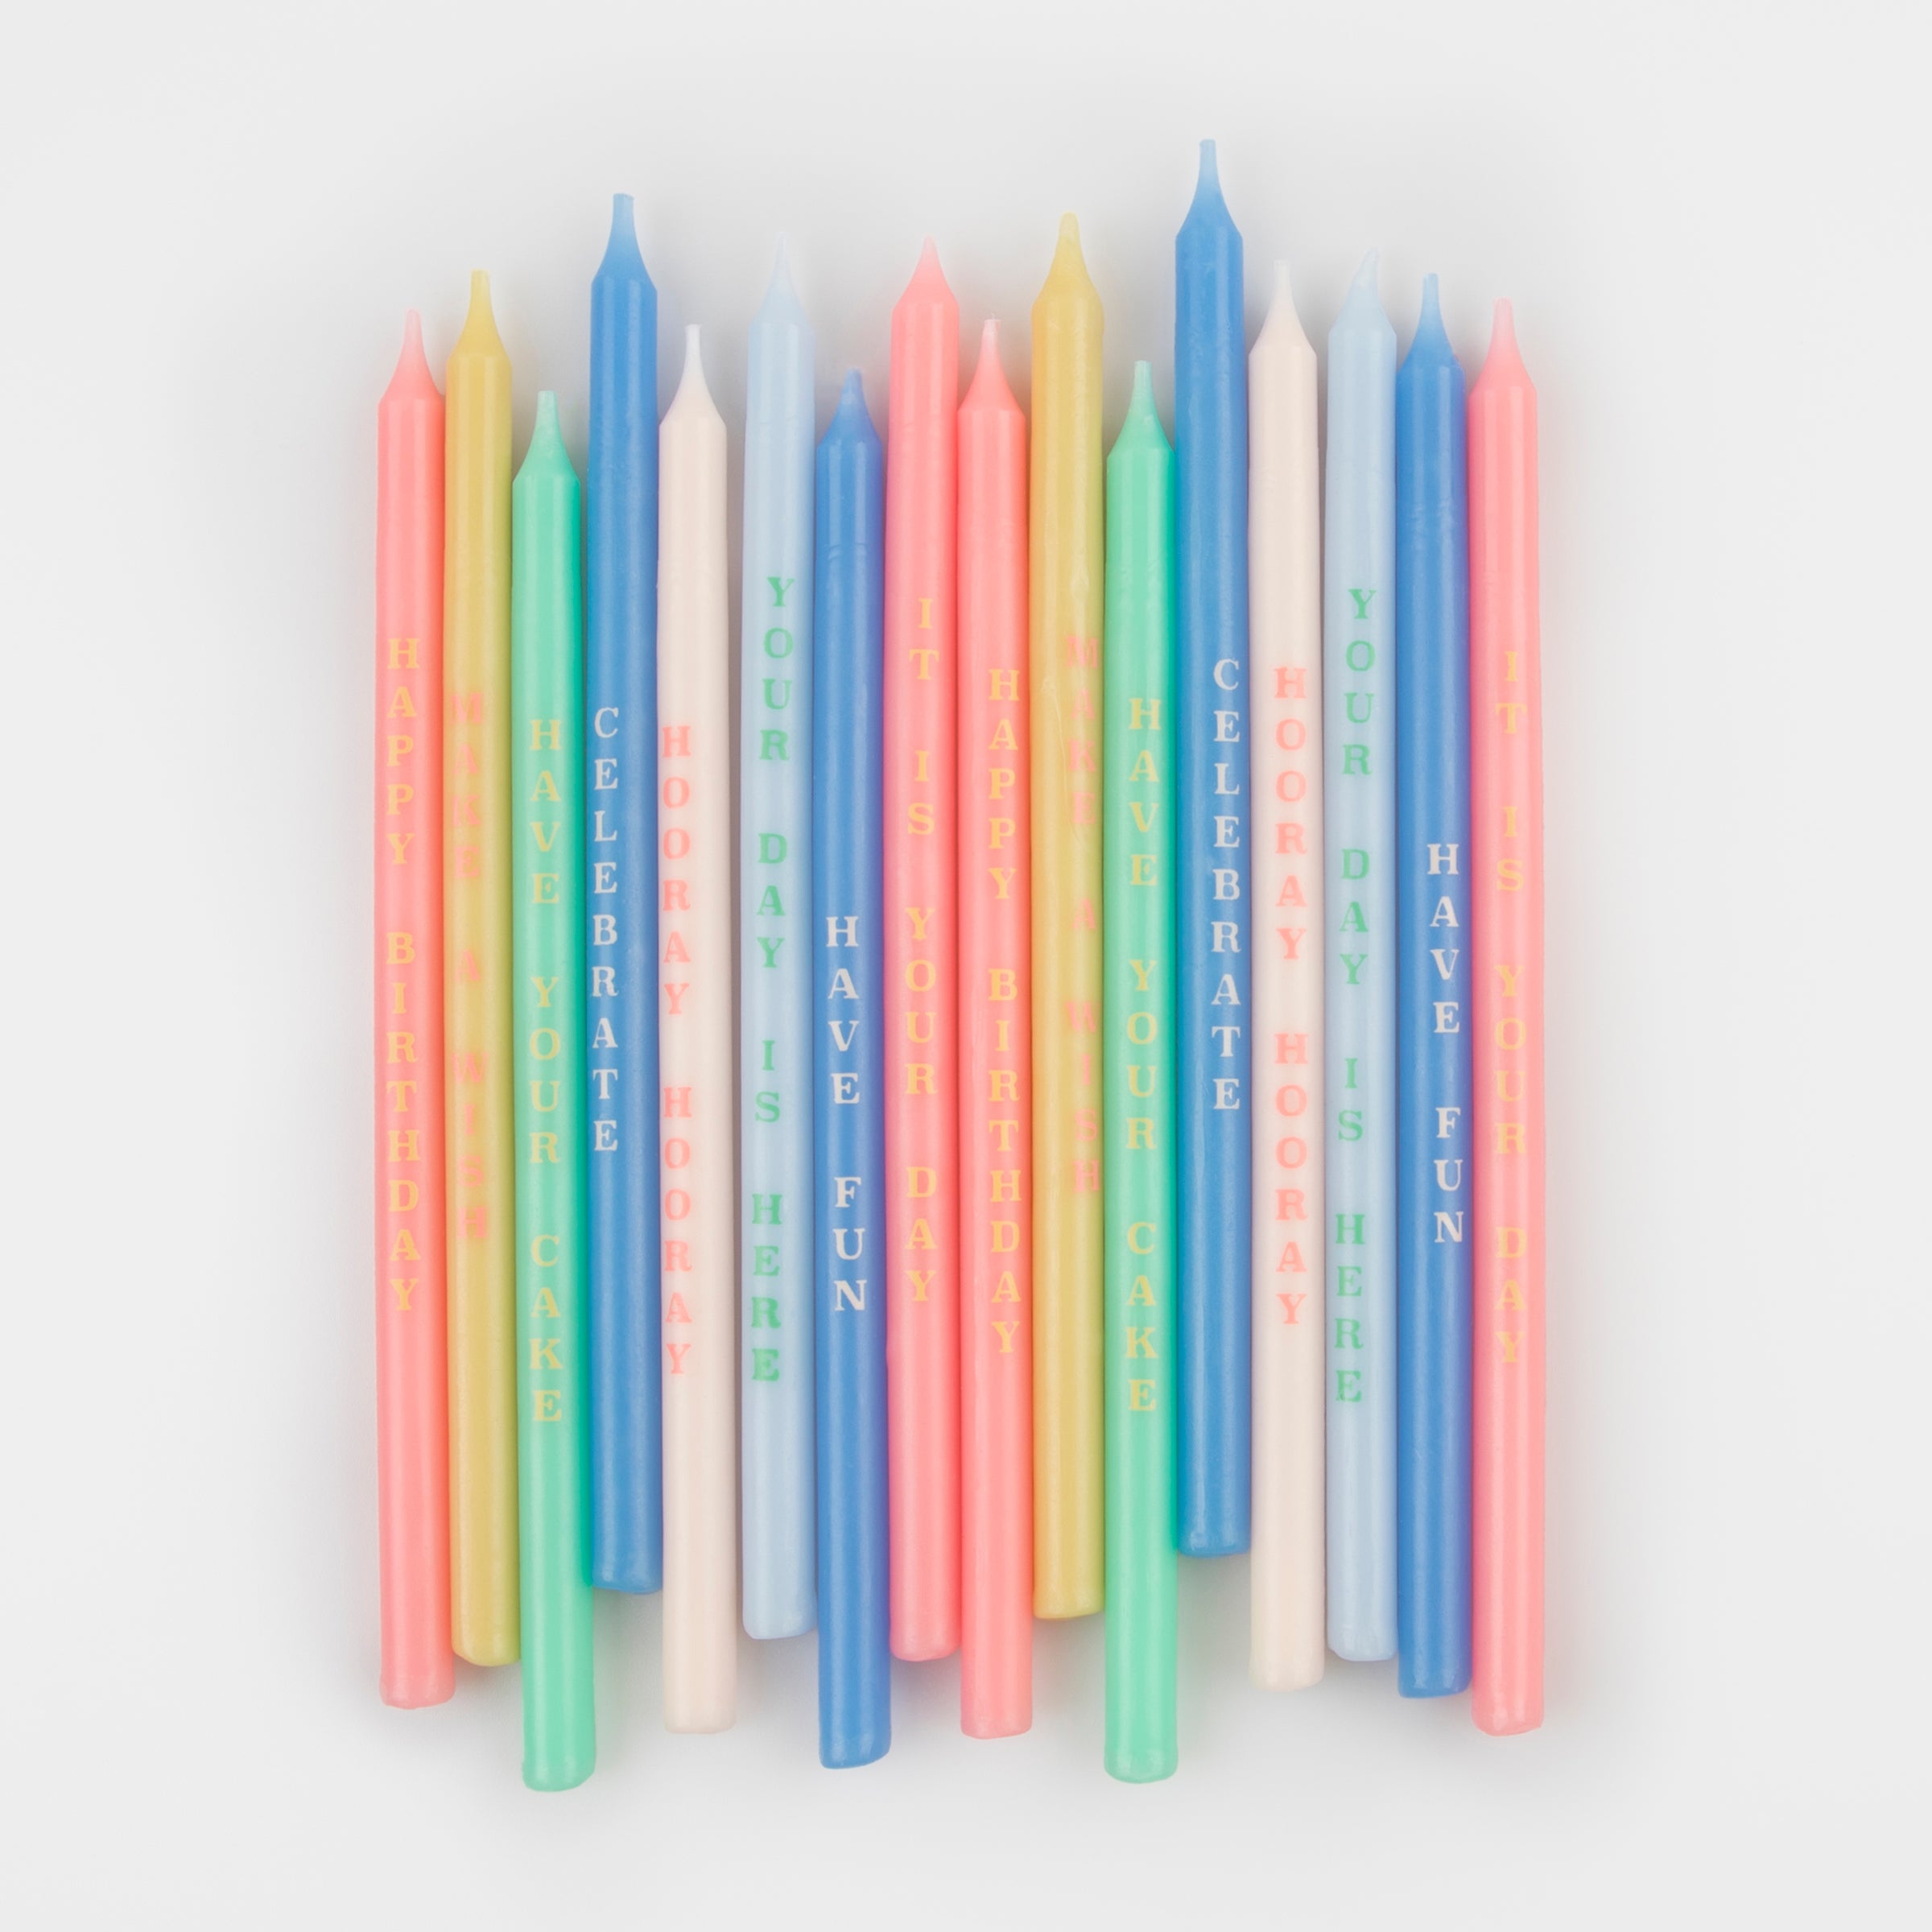 Make your birthday cake look amazing with our special birthday cake candles in bright colors with fun message.